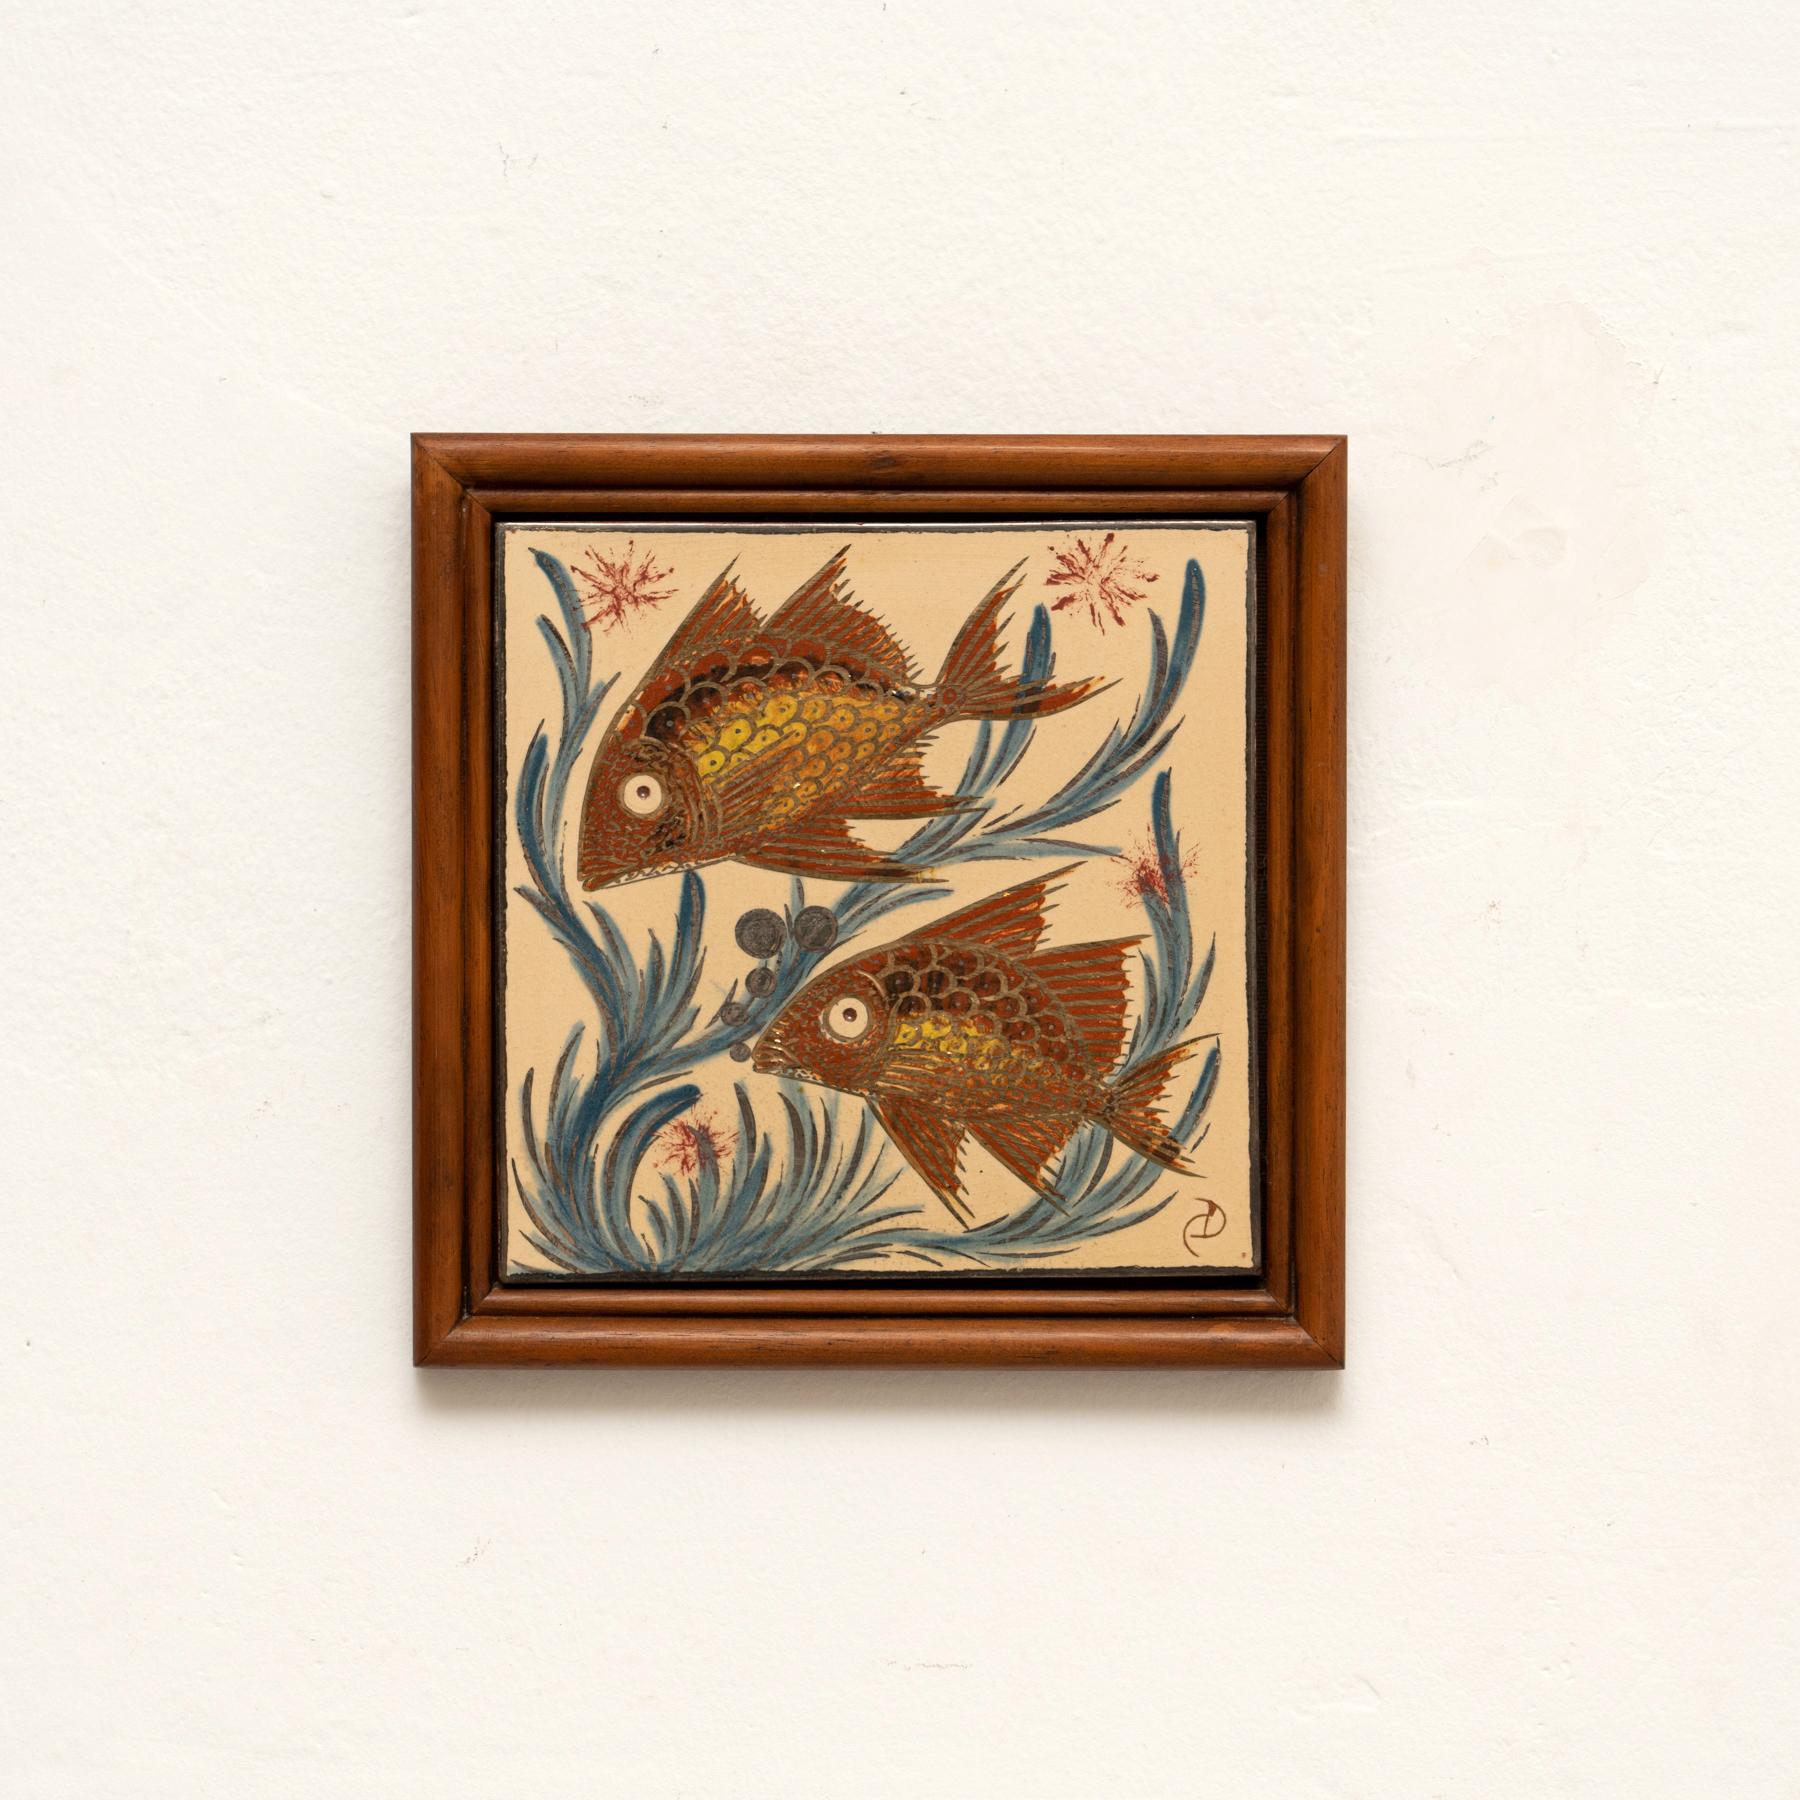 Ceramic hand painted artwork of TWO fishes design by Catalan artist Diaz Costa, circa 1960.
Framed. Signed.

In original condition, with minor wear consistent of age and use, preserving a beautiul patina.